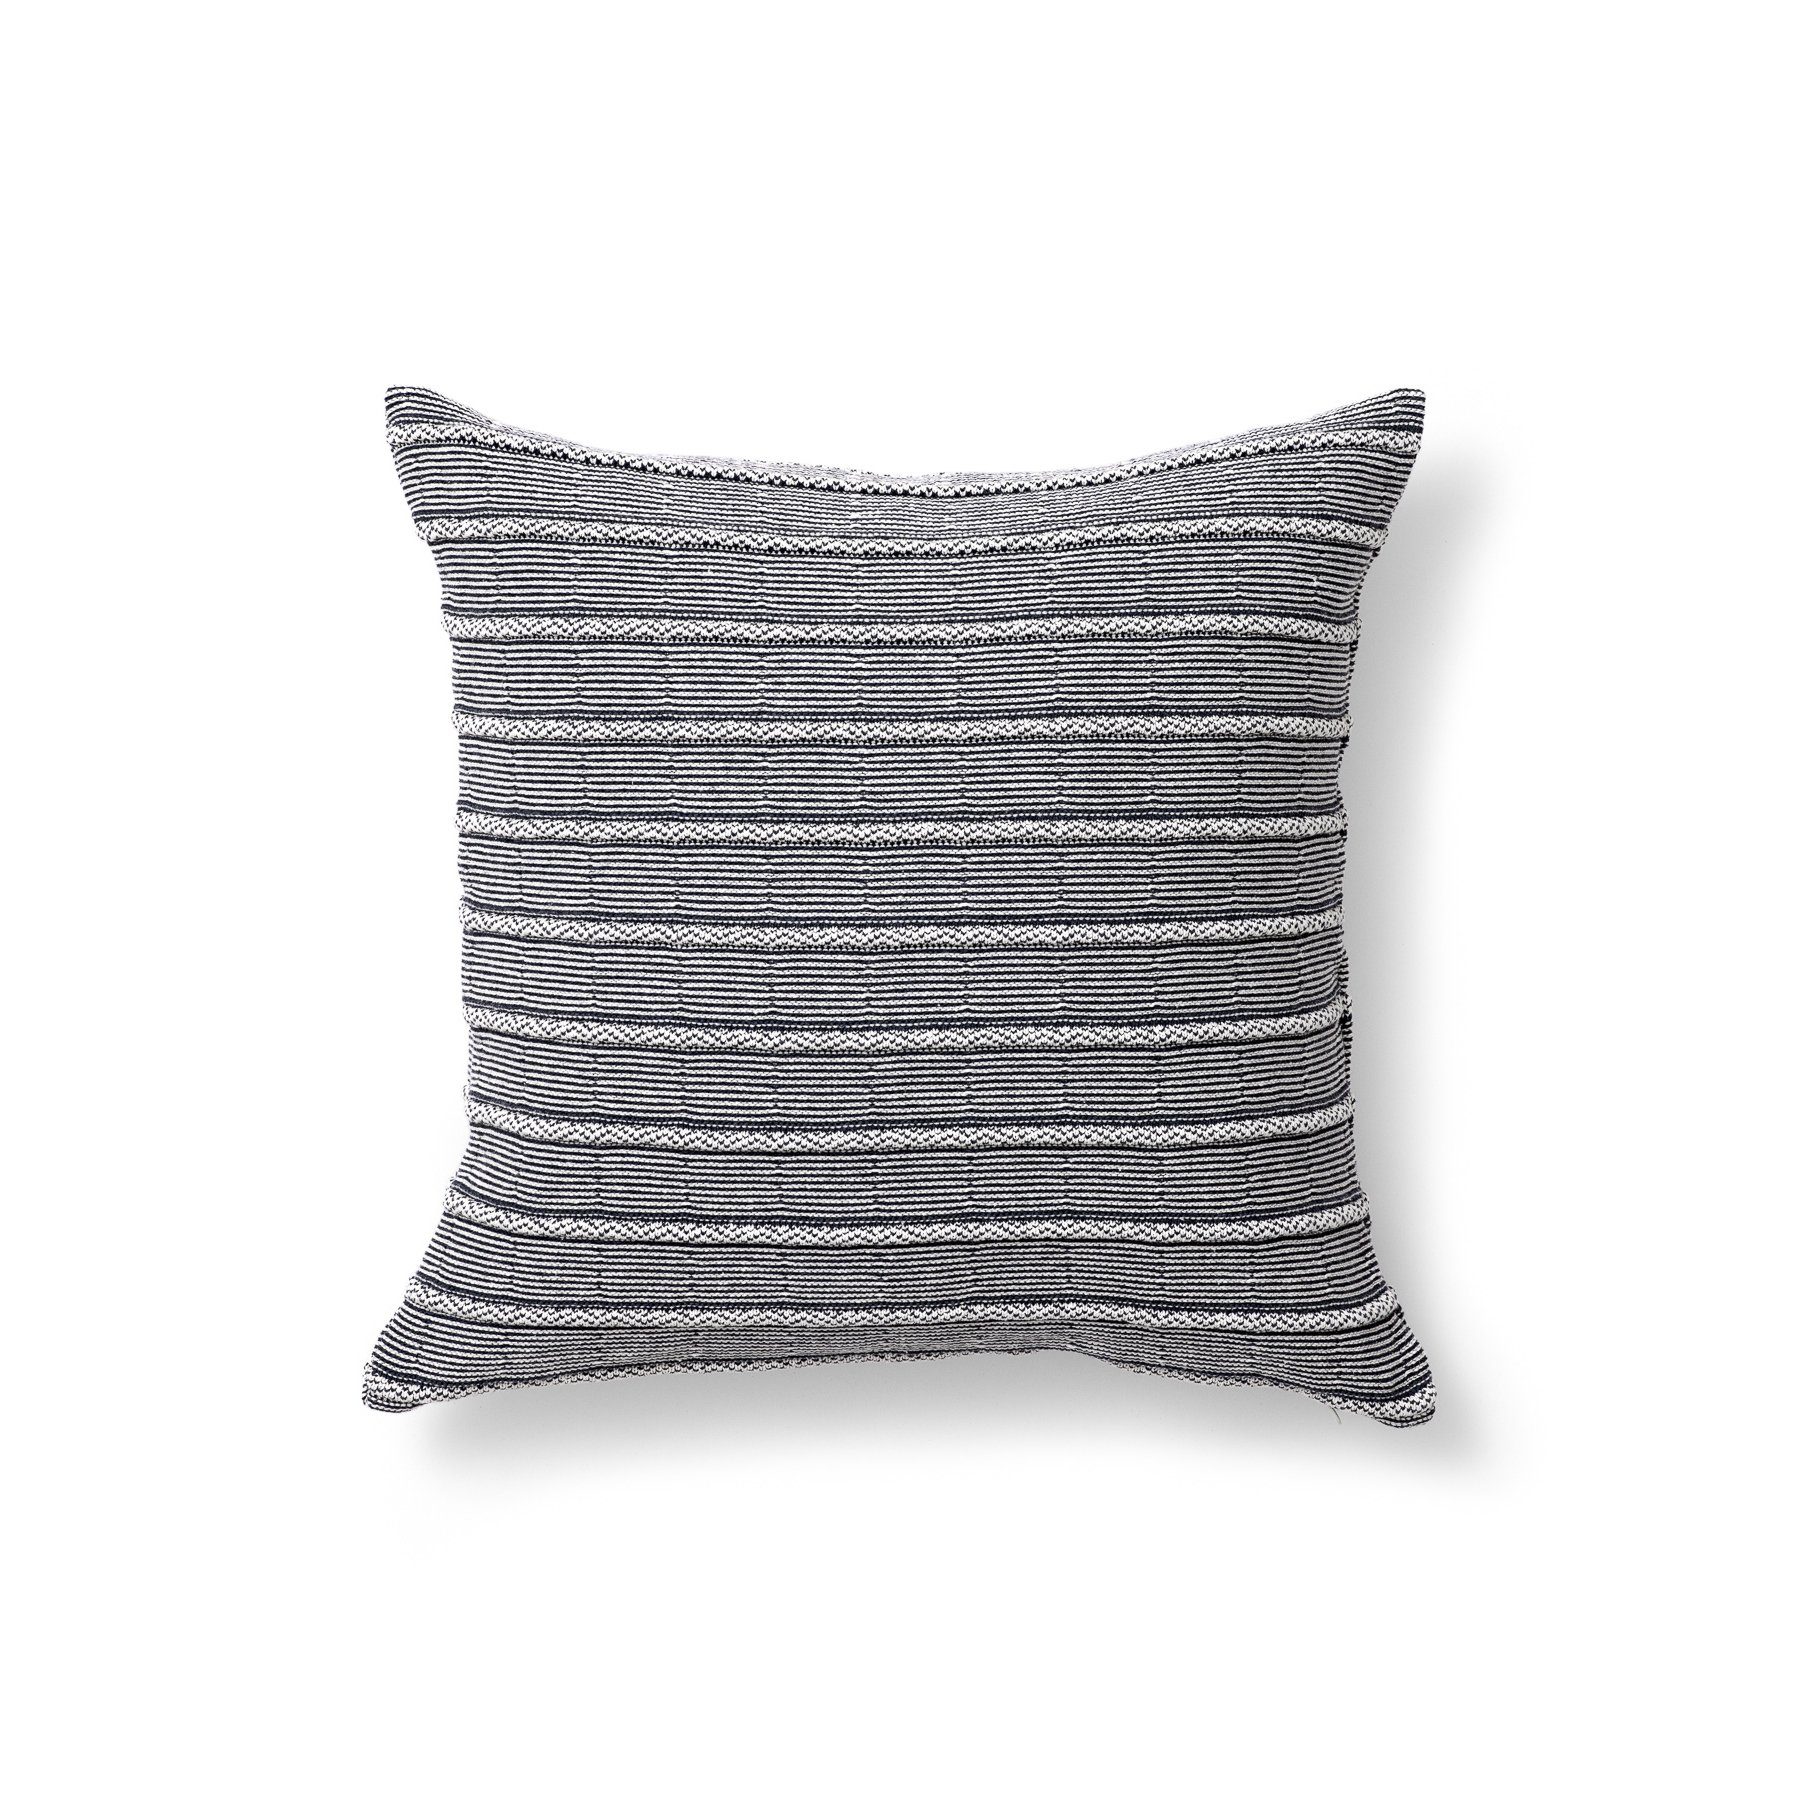 18x18" rolled texture pillow | jeans + greggio